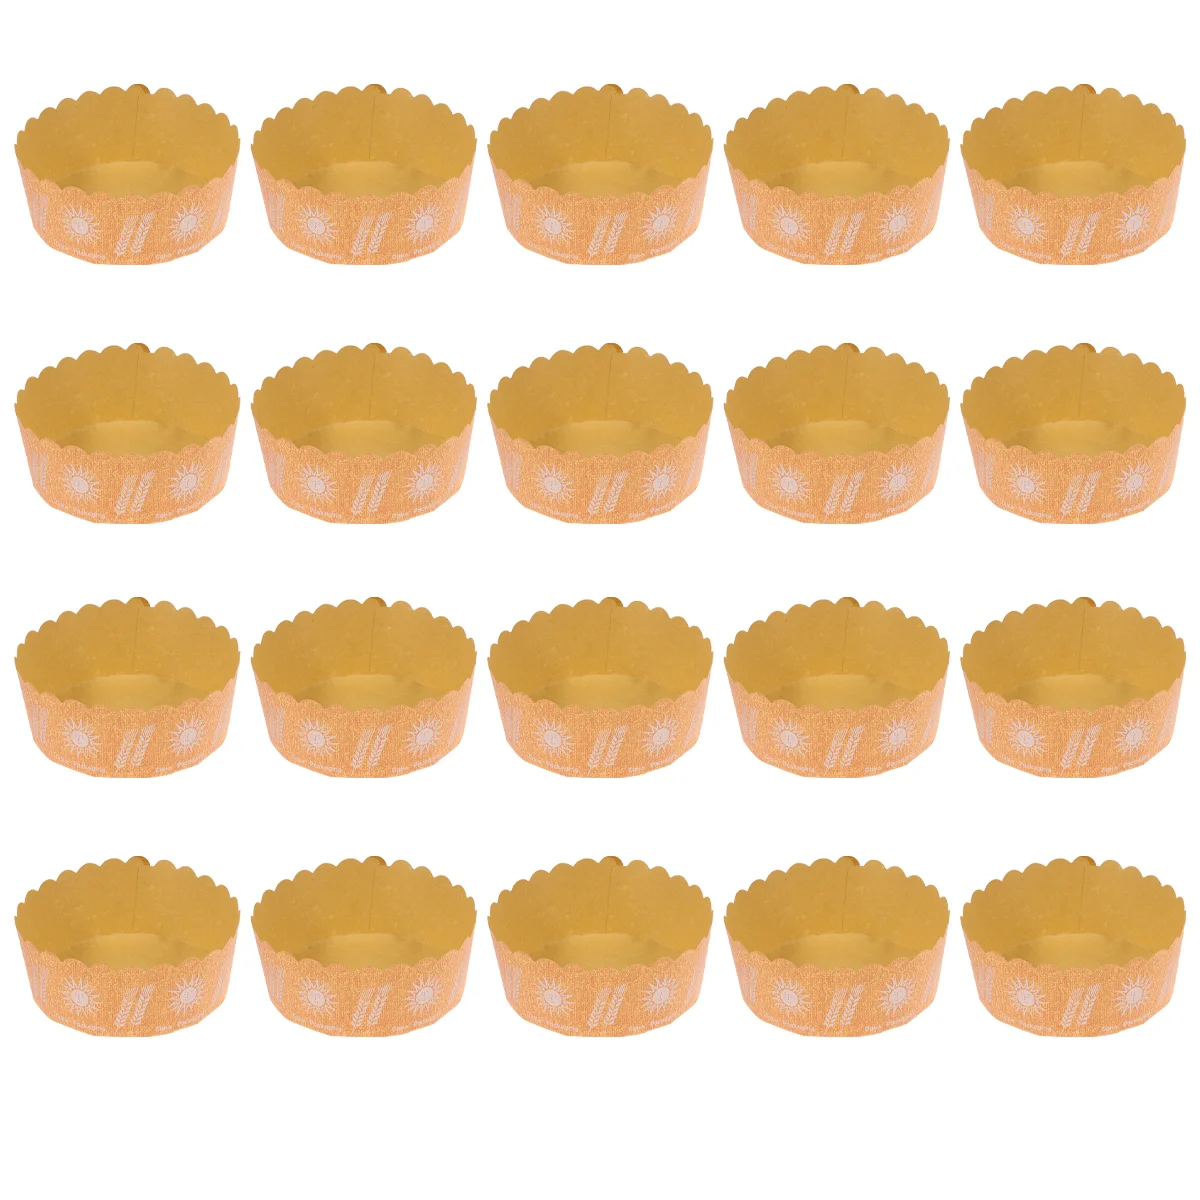 

90PCS Natural Cupcake Liners Kraft Paper Cups Large Sunflower Pattern Cupcake Pastry Muffin Holders 6 Inches for Dessert